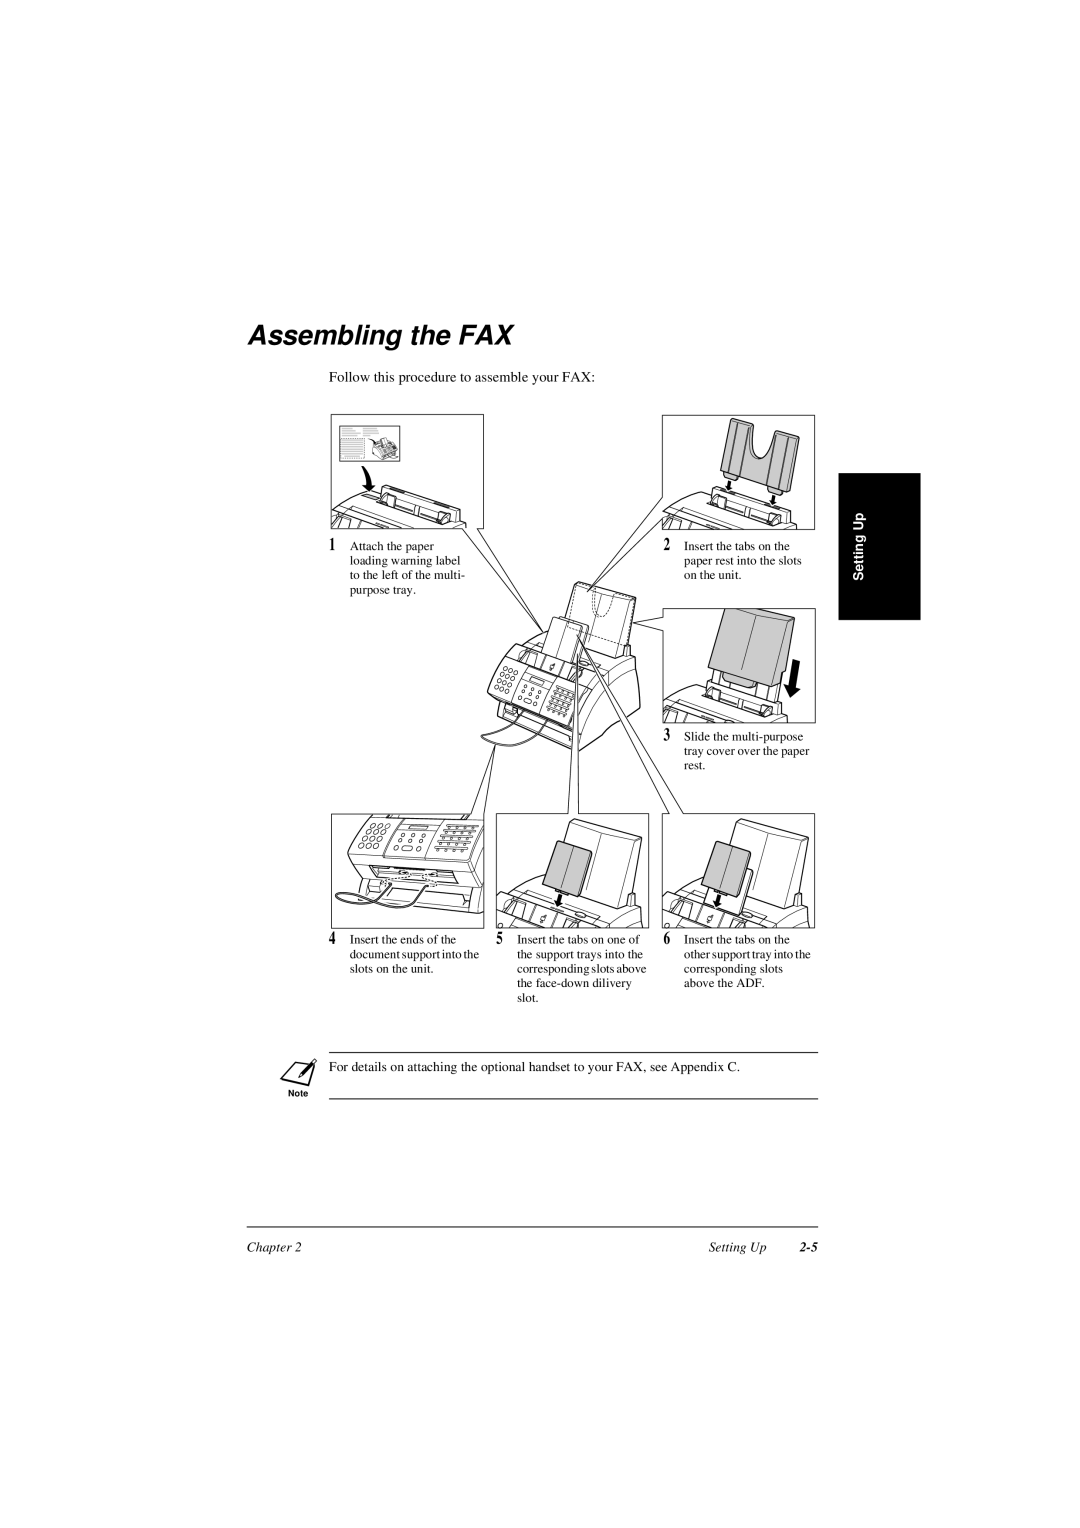 Canon L240, L290 manual Assembling the FAX, Follow this procedure to assemble your FAX, Setting Up, Chapter 